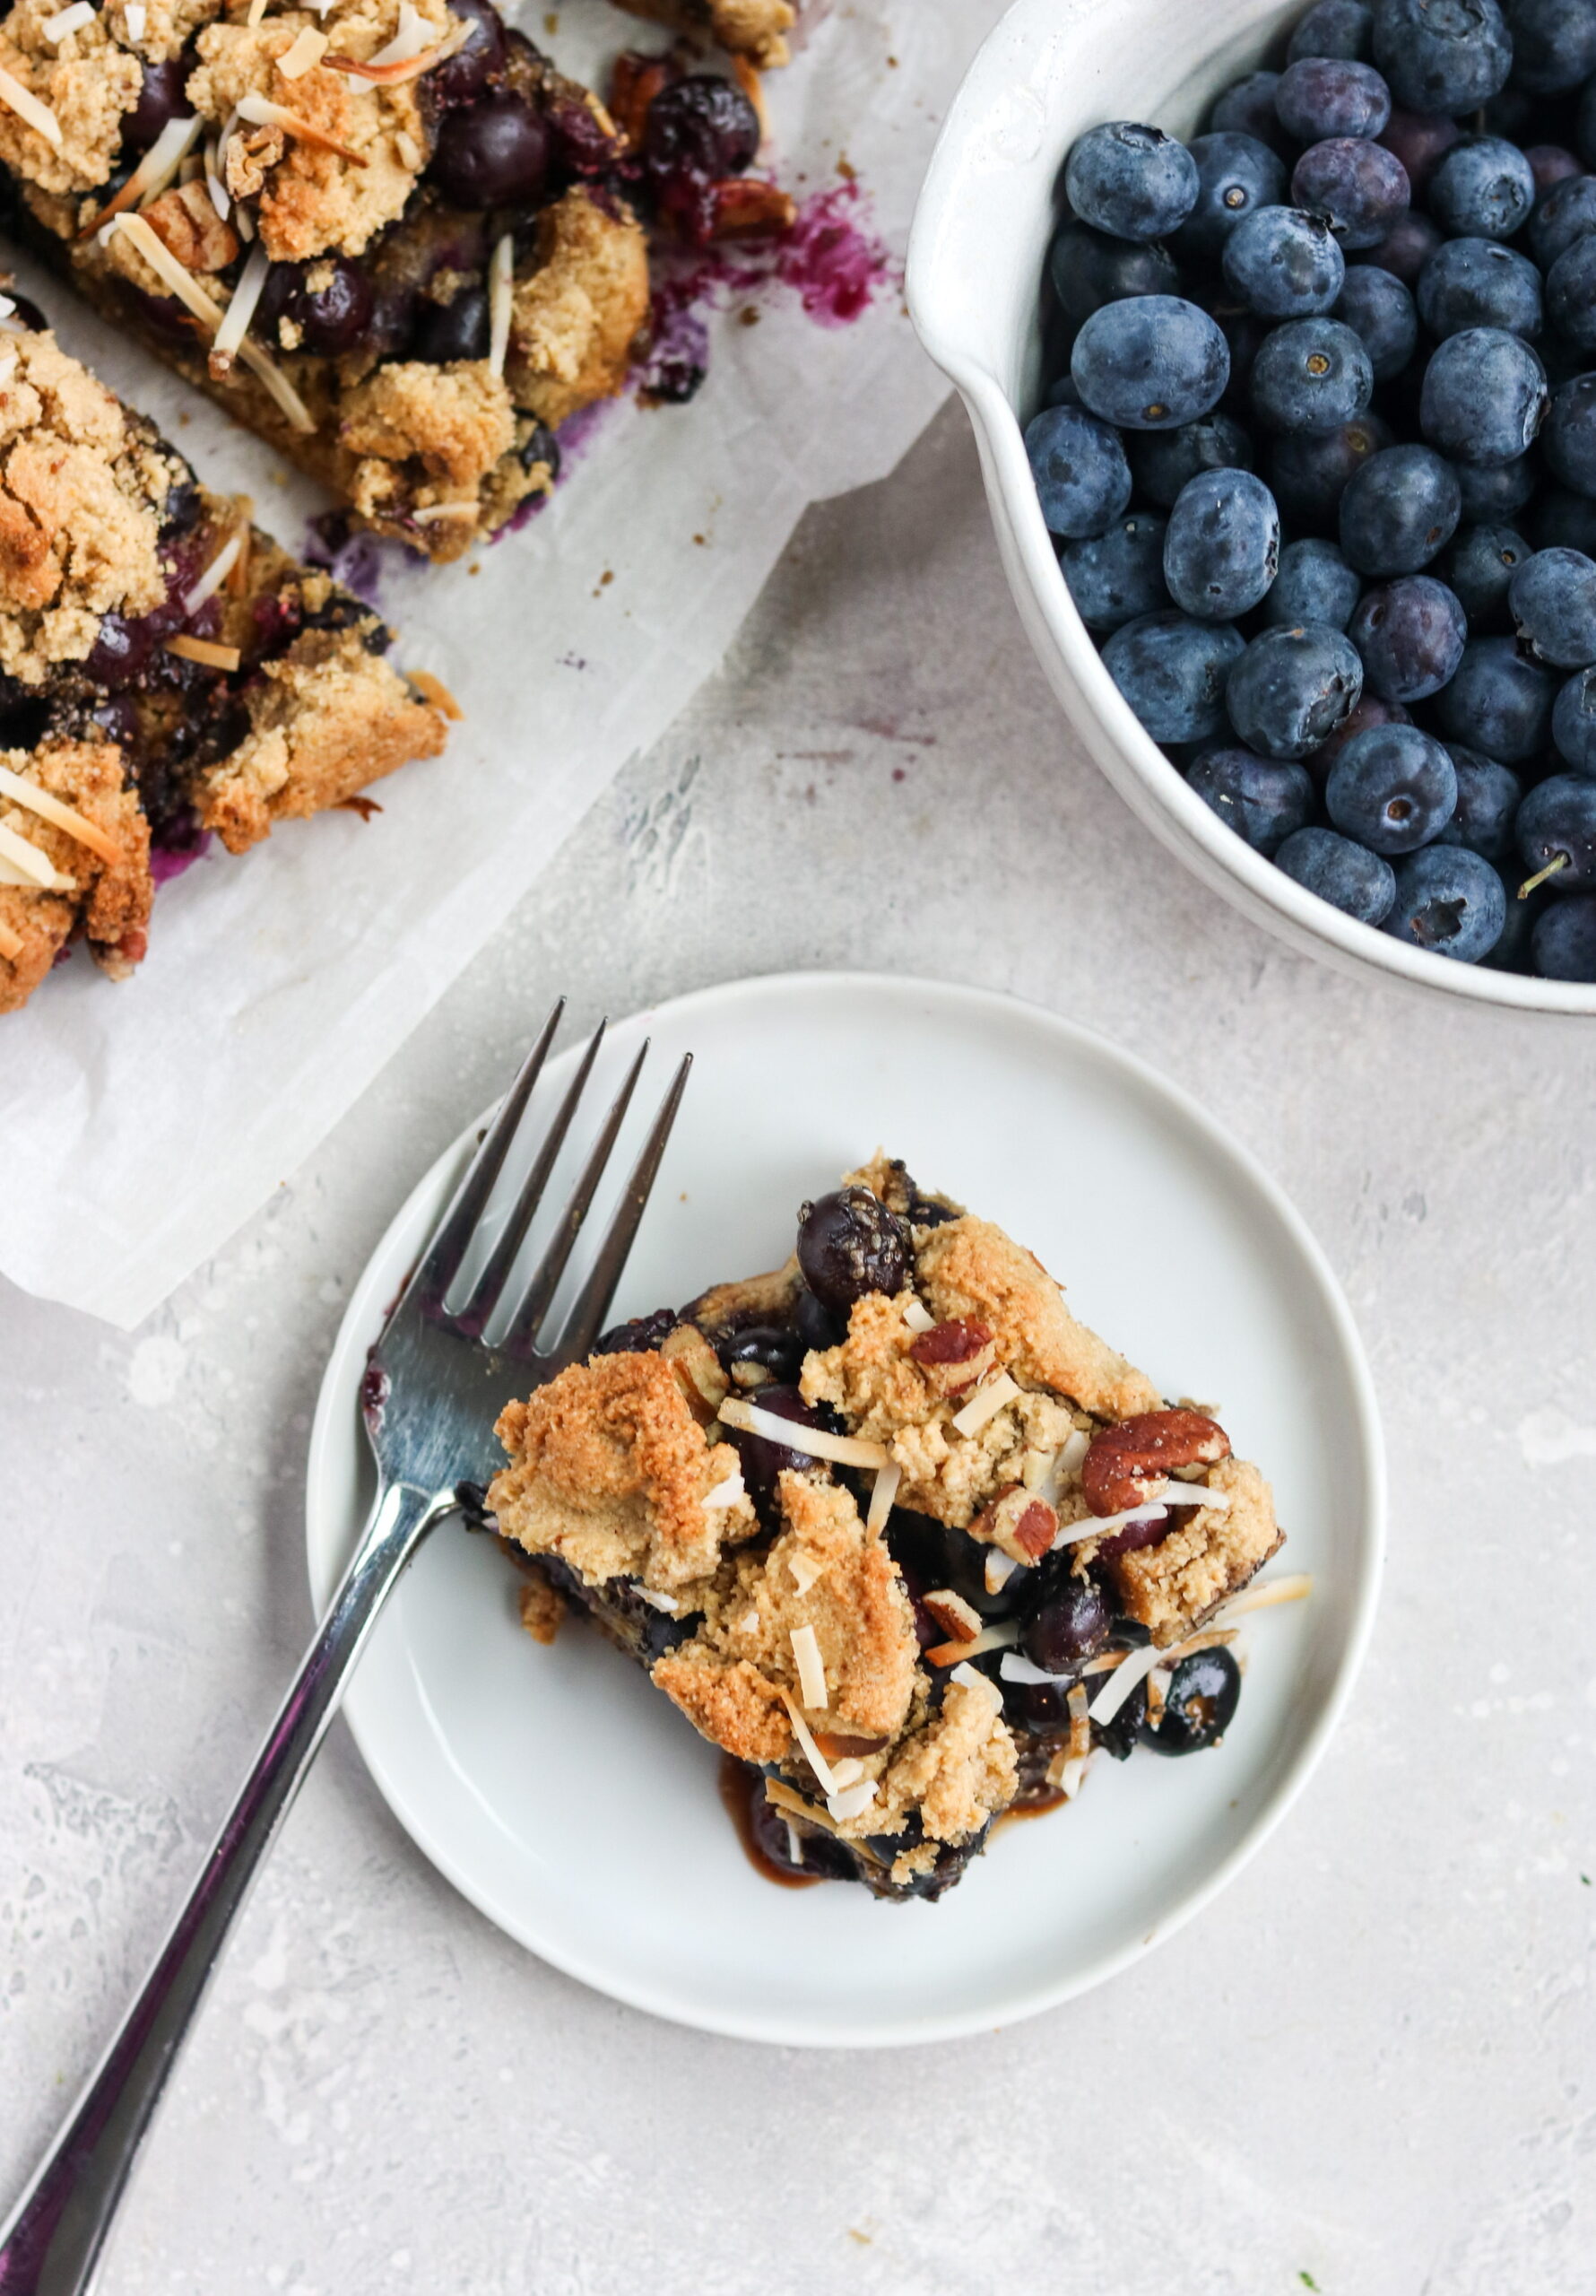 Blueberry Bars and blueberries on a table